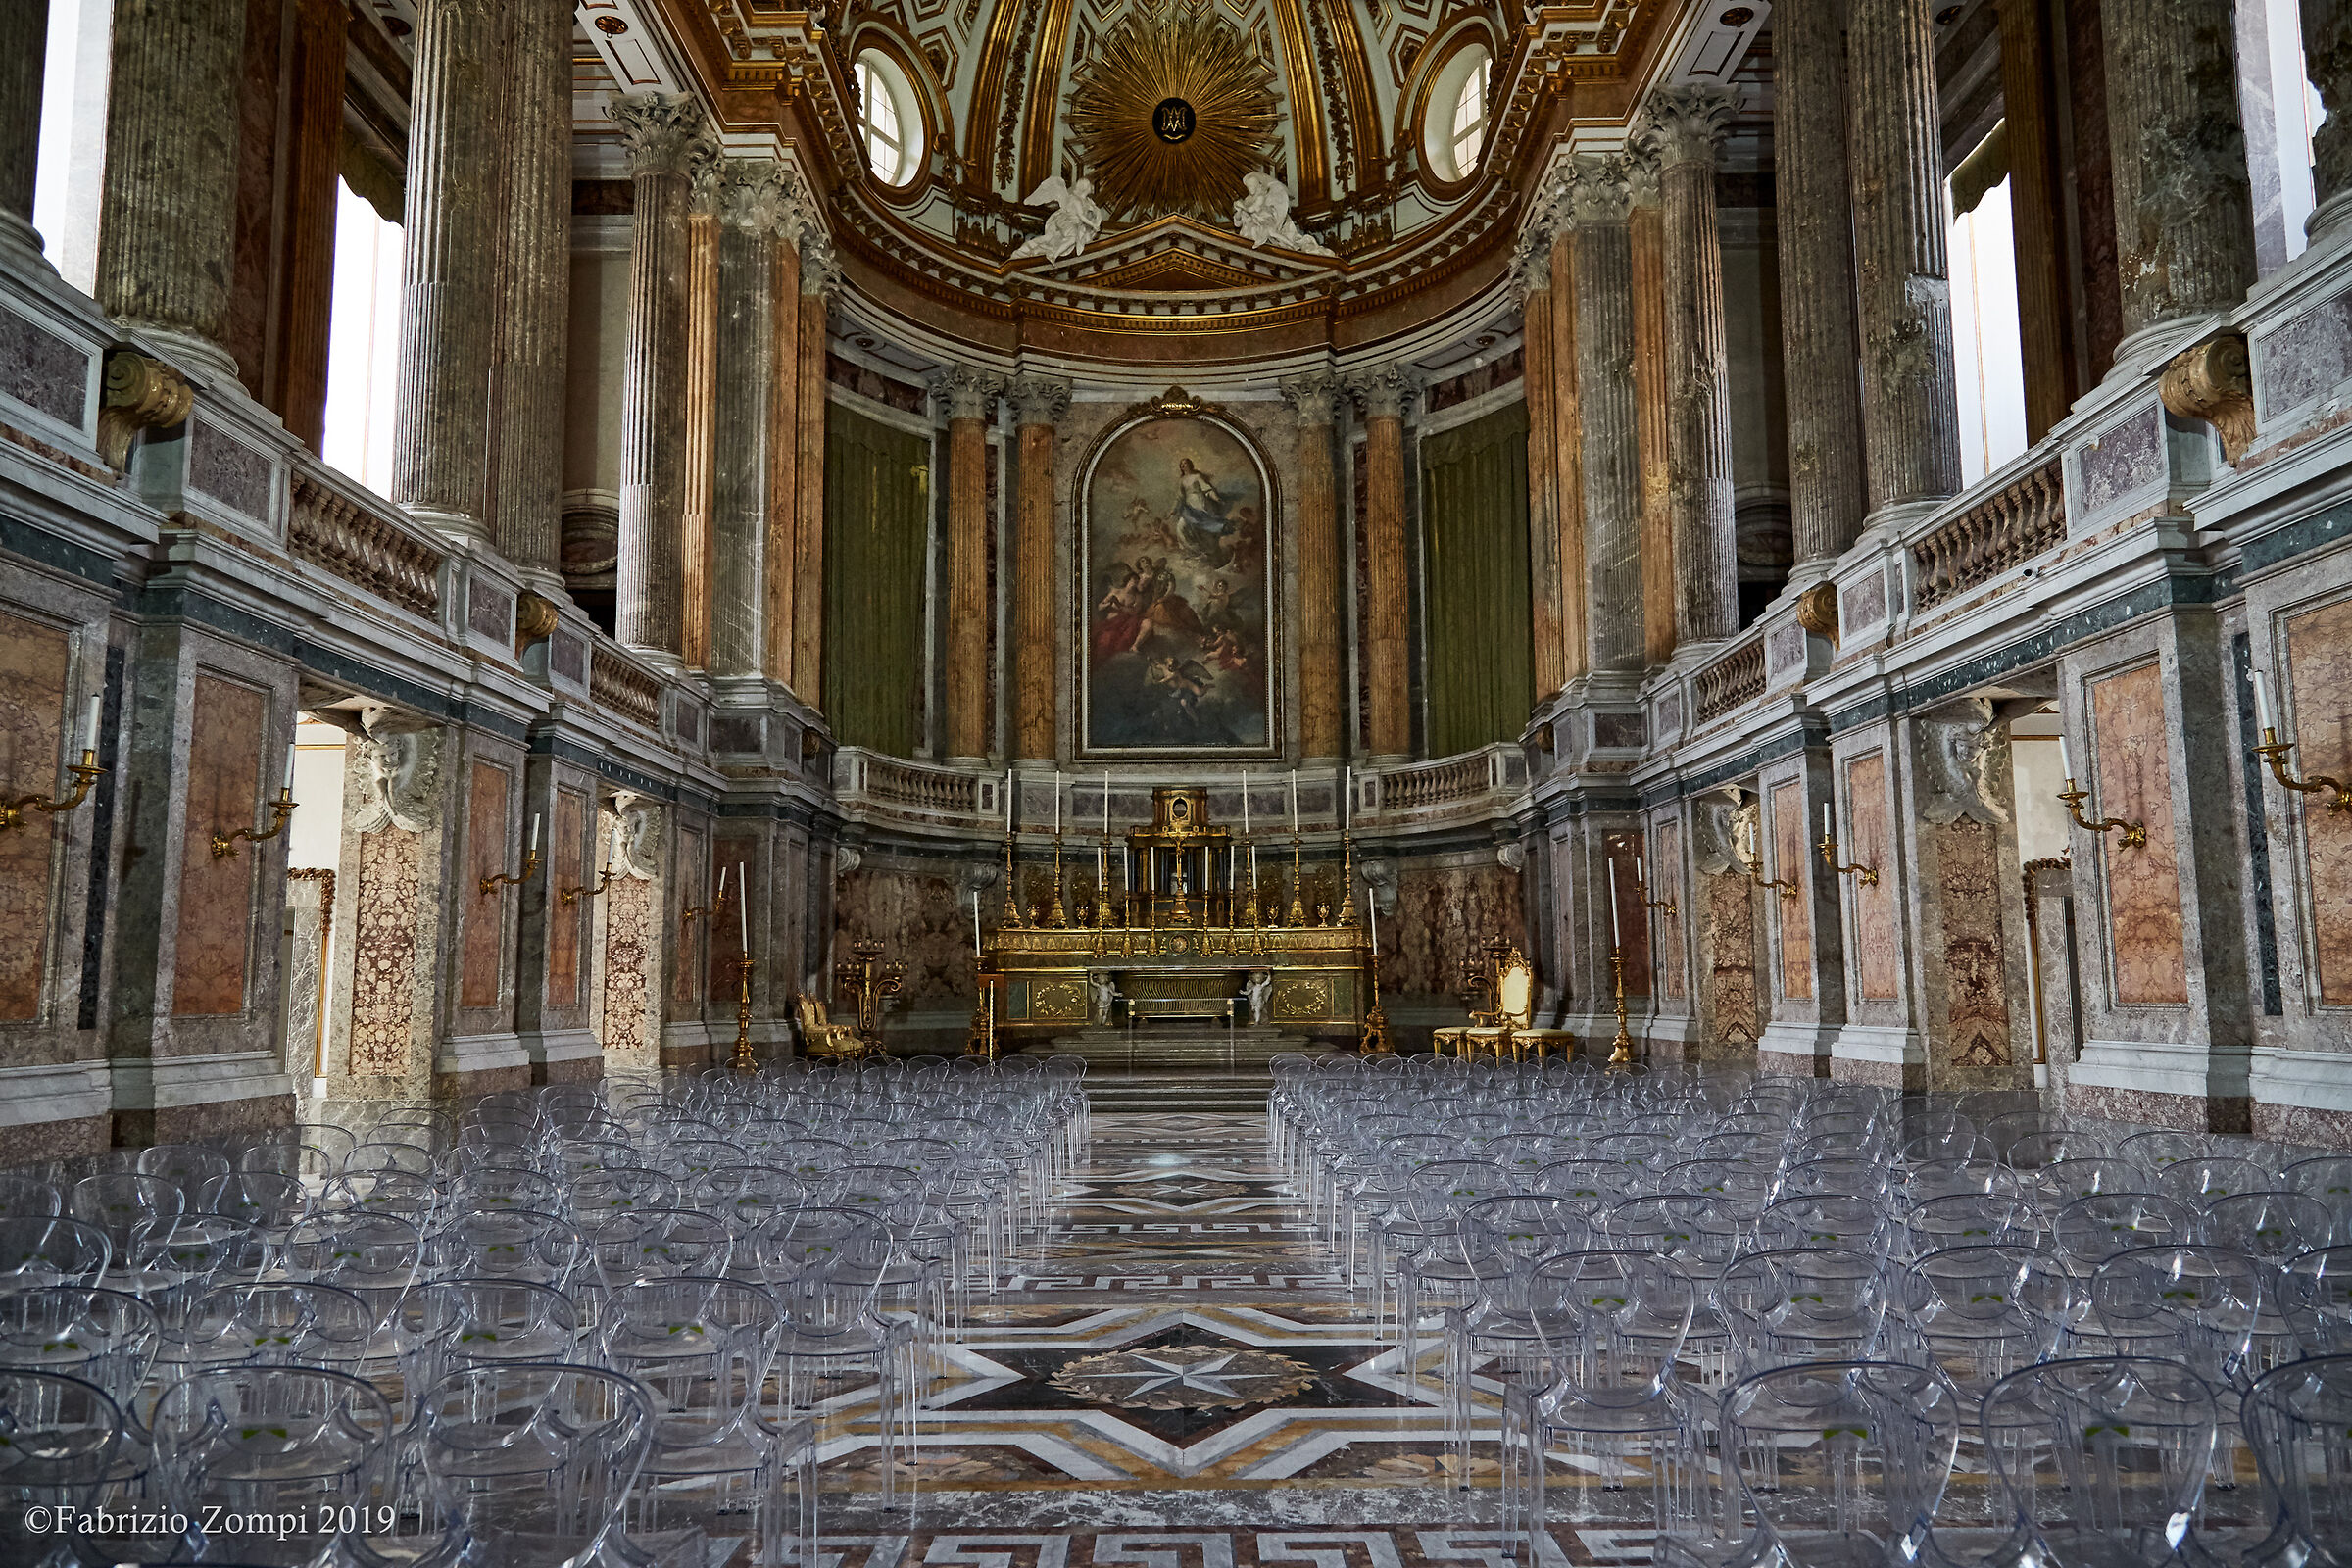 Church inside the palace of Caserta...